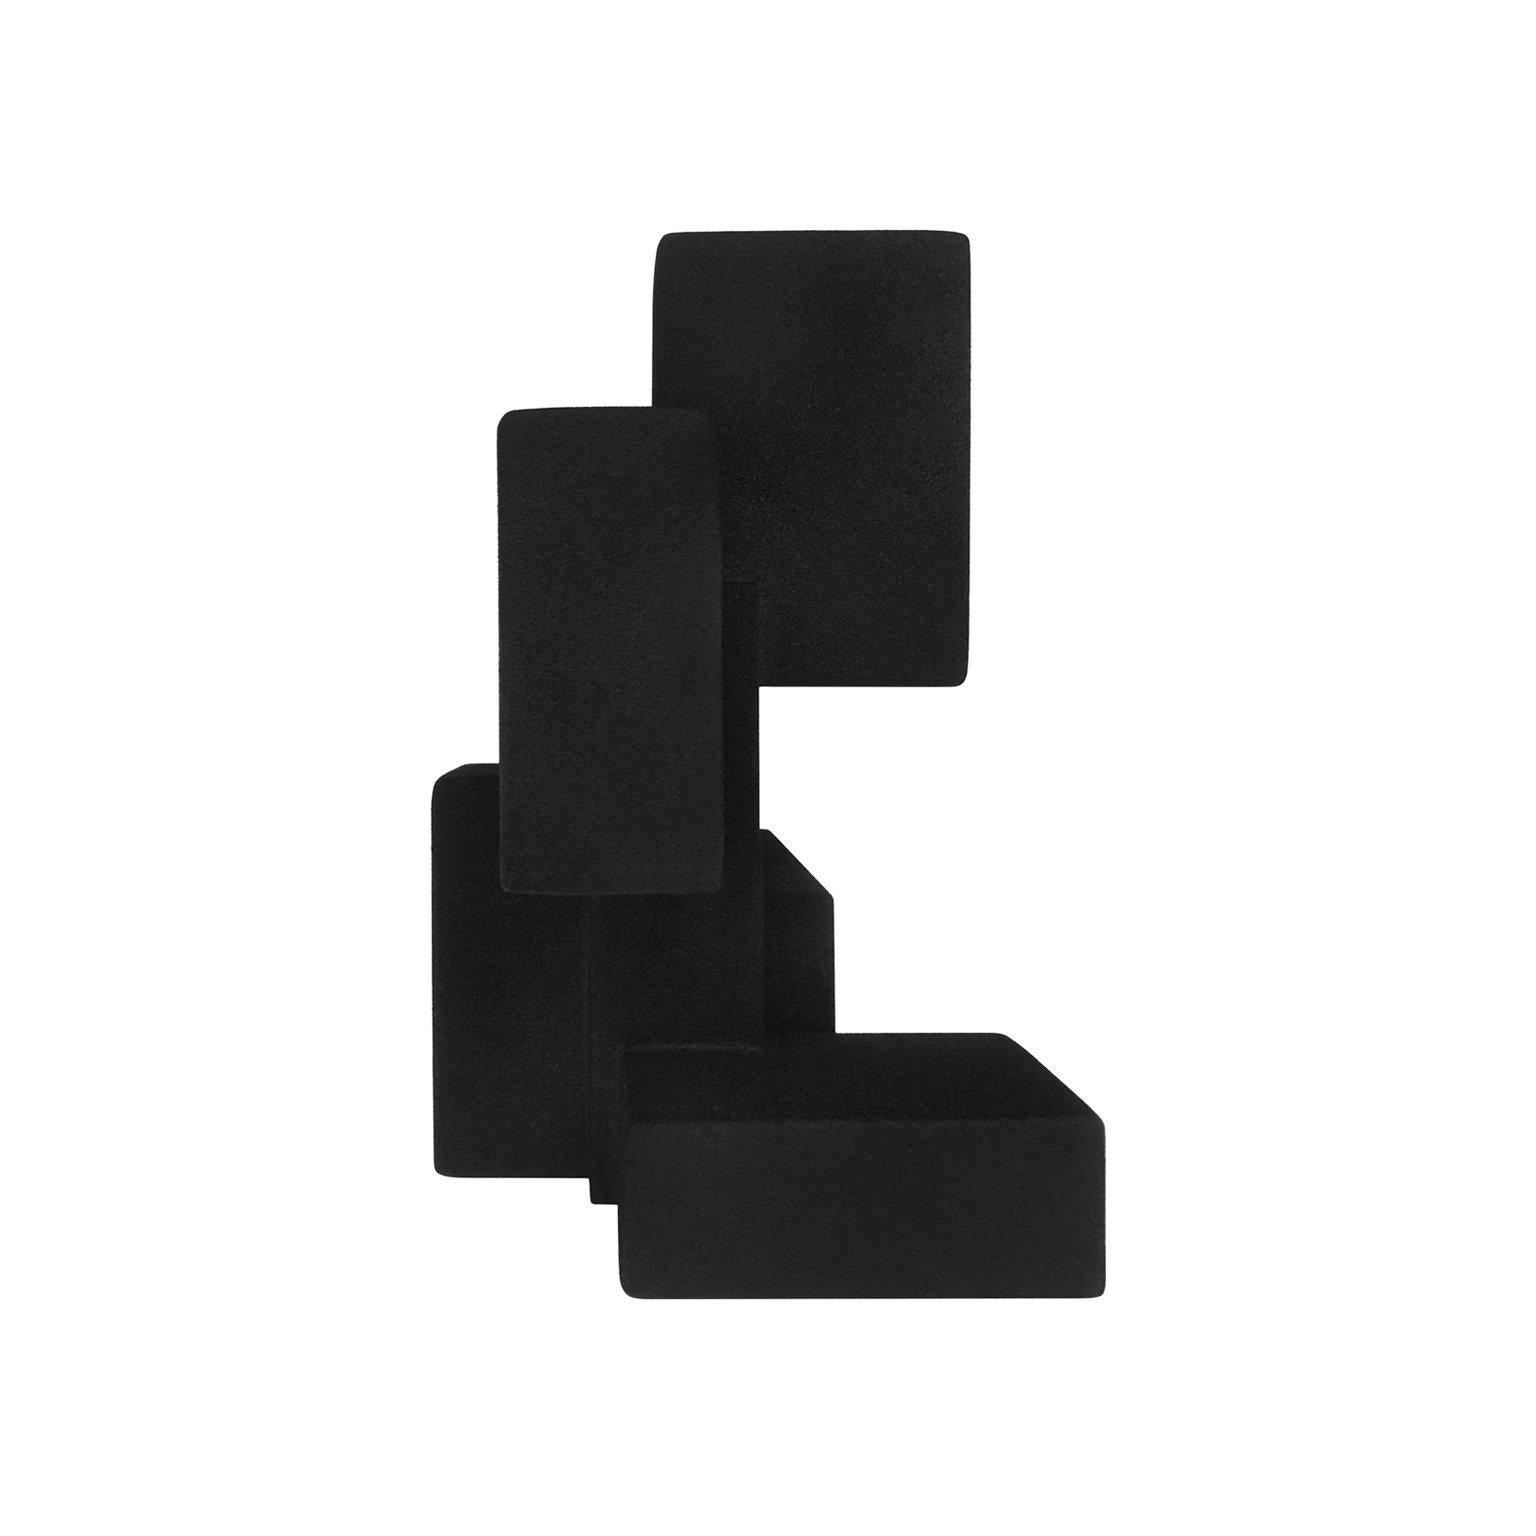 Abstract Sculpture in Matte Black Rubber Finish Dan Schneiger In Excellent Condition For Sale In Chicago, IL